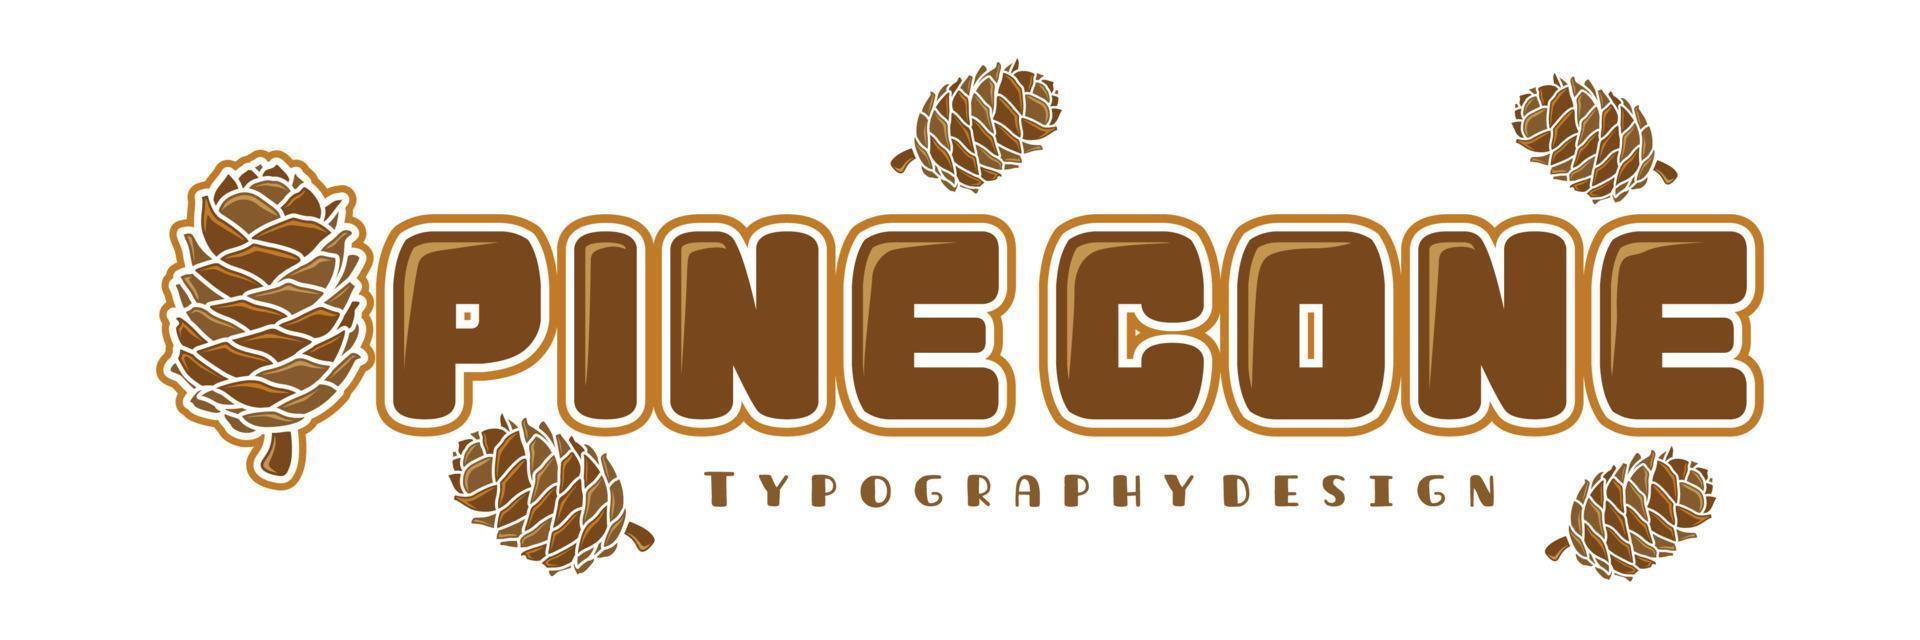 Pinecone Typography With pinecone icon For Natural Or Outdoor Logo vector